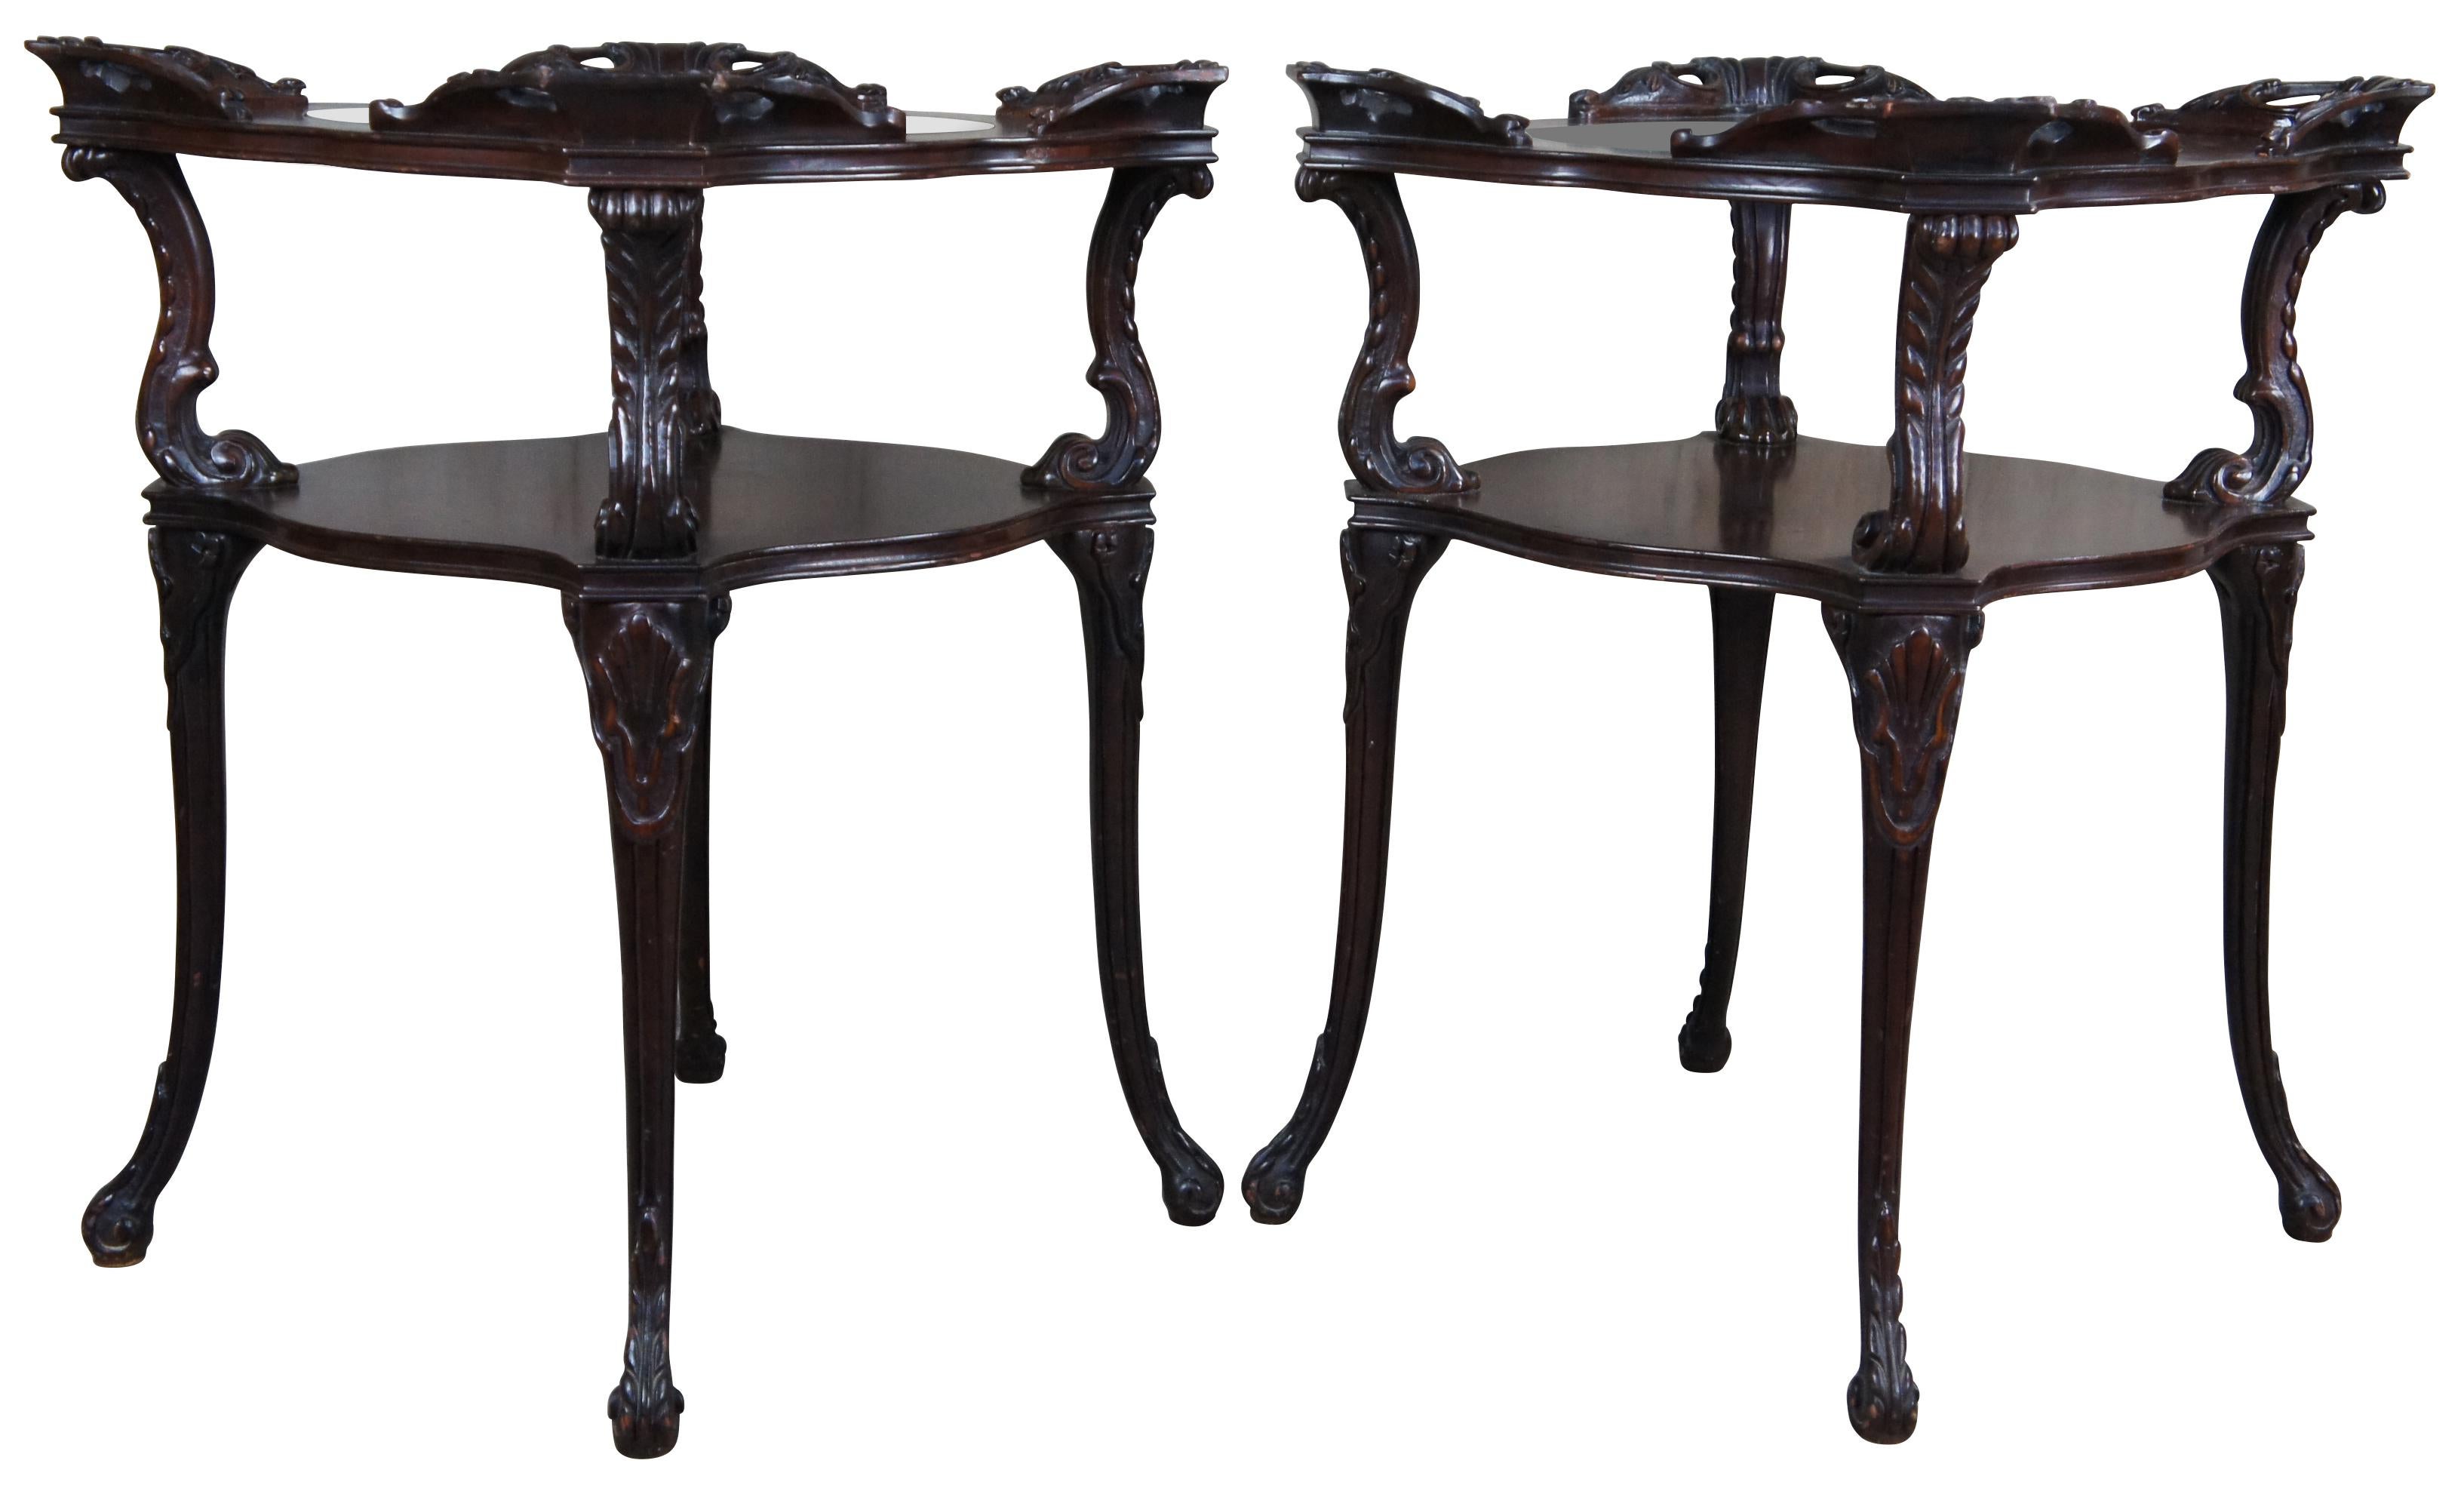 Adams Always Fine Furniture Louis XV style tiered end tables, circa 1930-40s.  Beautifully designed with acanthus and scalloped details. Features an inset round glass top resting on a raised wooden top supported by 